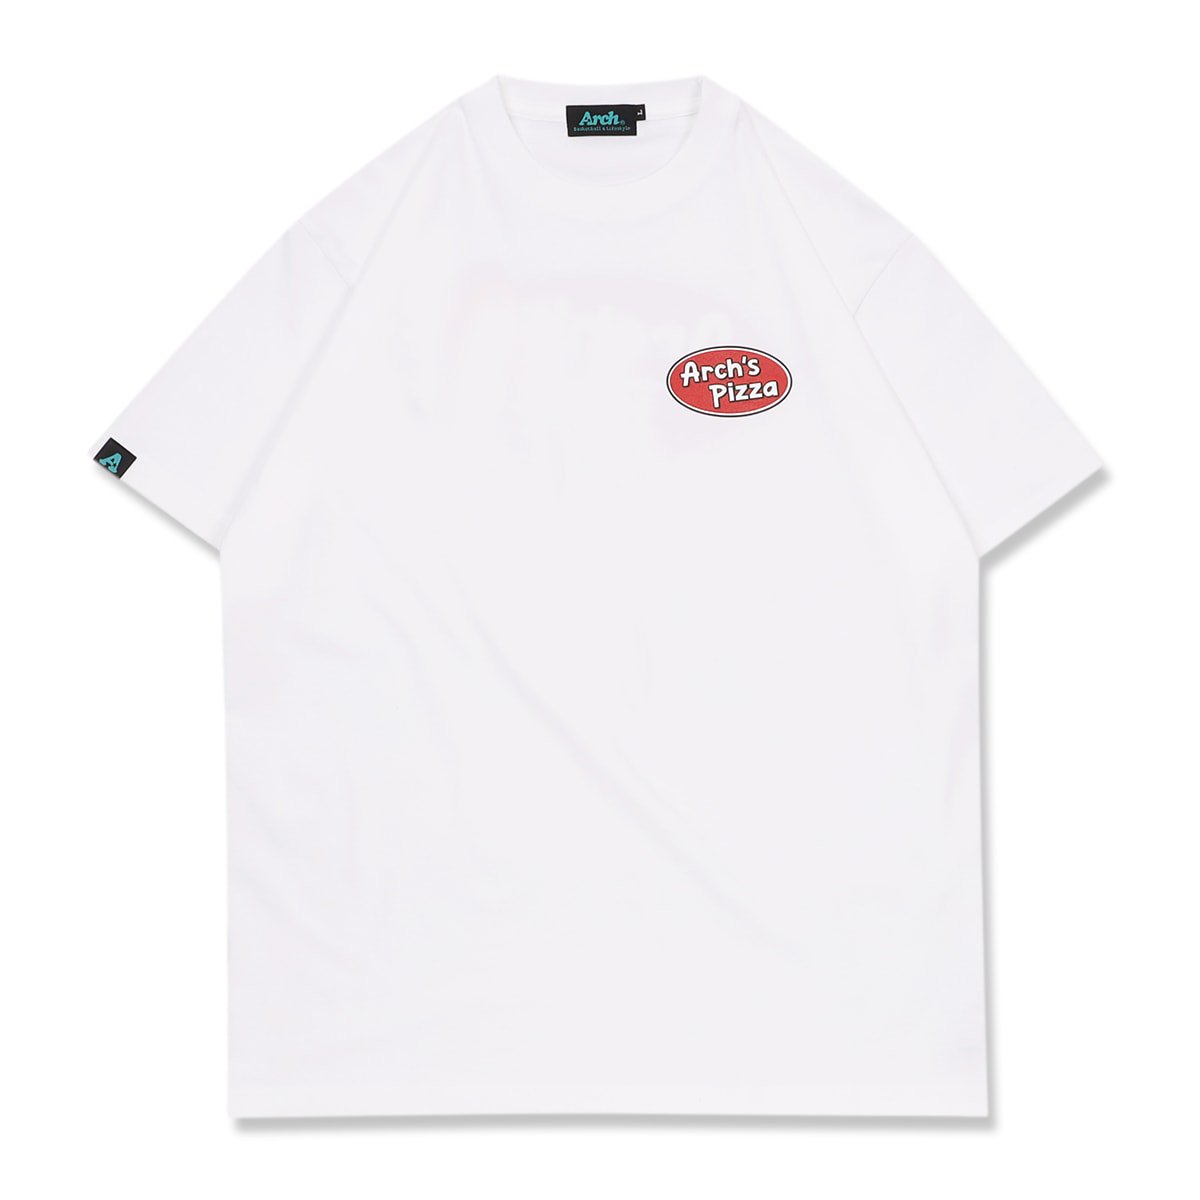 Arch's pizza tee【white】